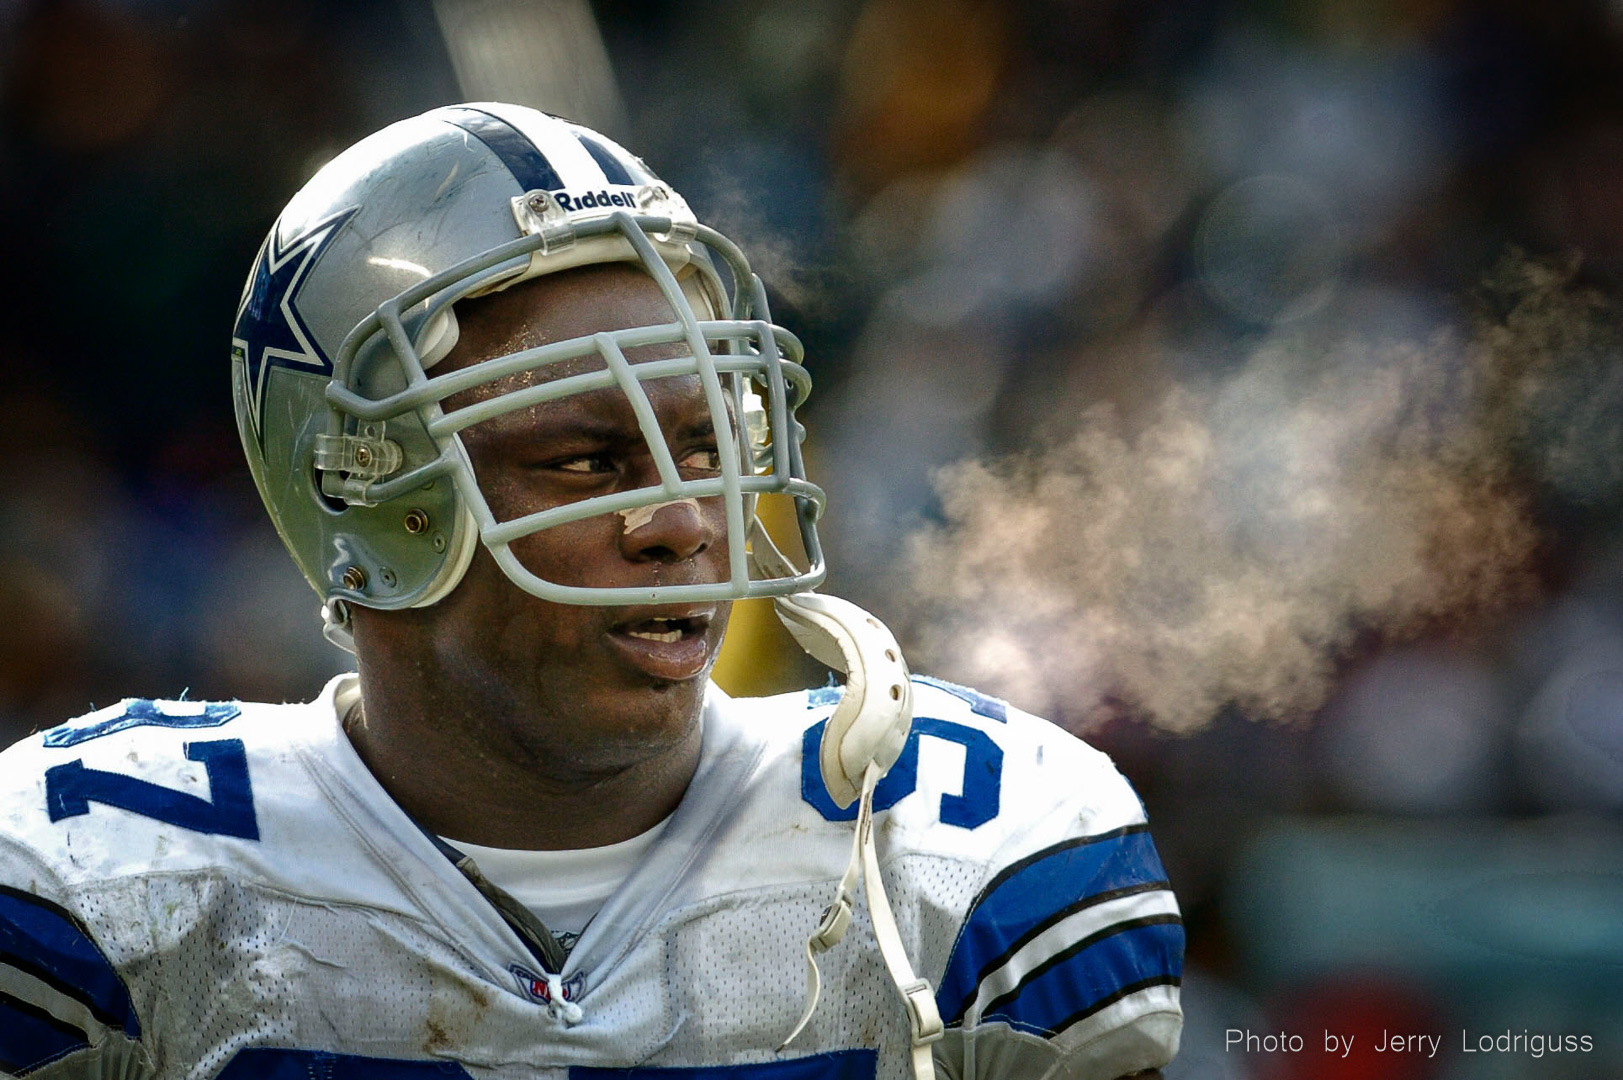 With steam coming from his breath in the cold, Cowboys La'Roi Glover walks off the field after an Eagles score . The Philadelphia Eagels beat the Dallas Cowboys 36-10 in Philadelphia on Sunday December 7, 2003.